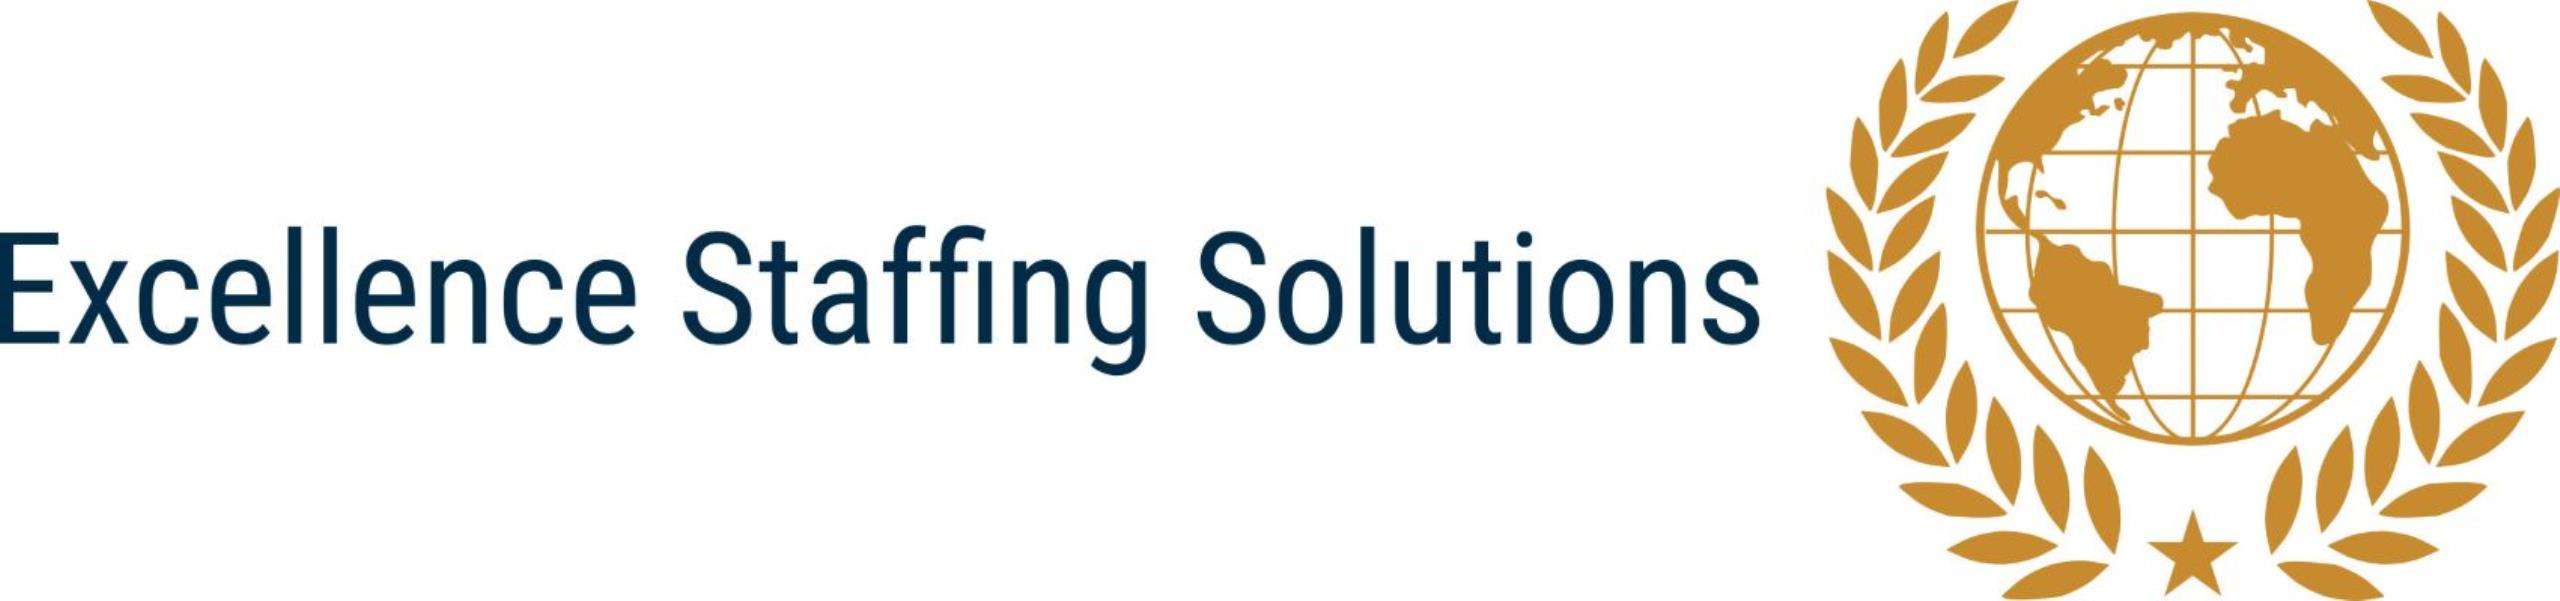 Excellence Staffing Solutions L.L.C. Logo